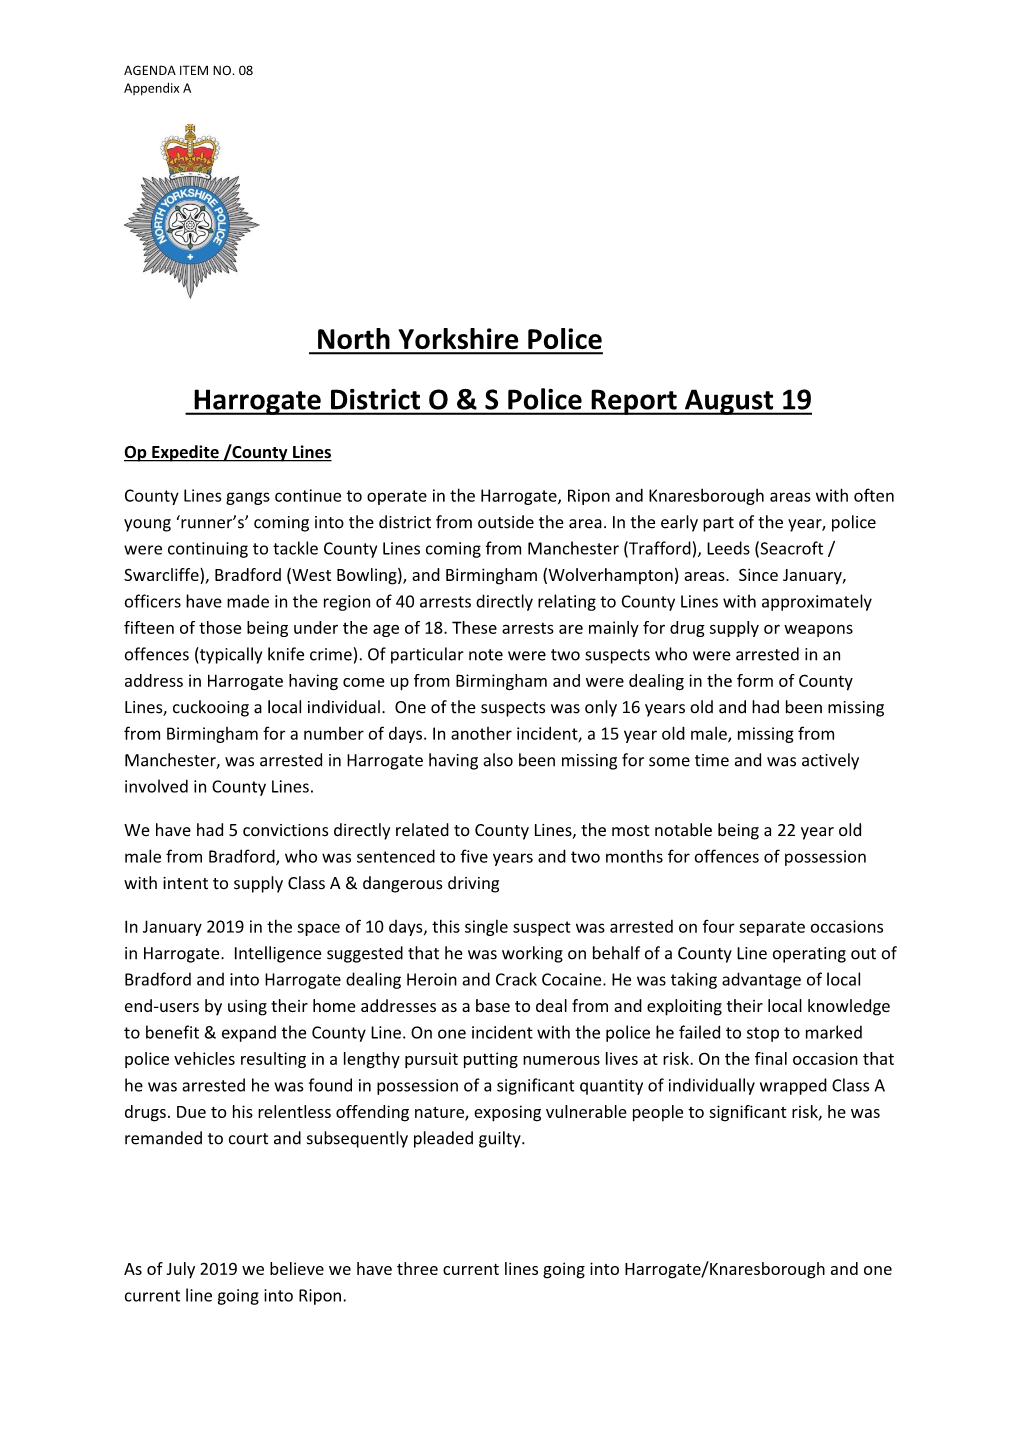 North Yorkshire Police Report